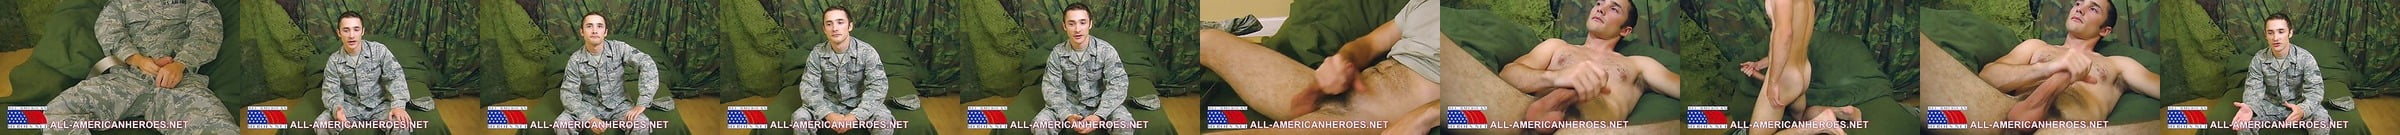 All American Heroes Gay Hd Porn Videos All Xhamster